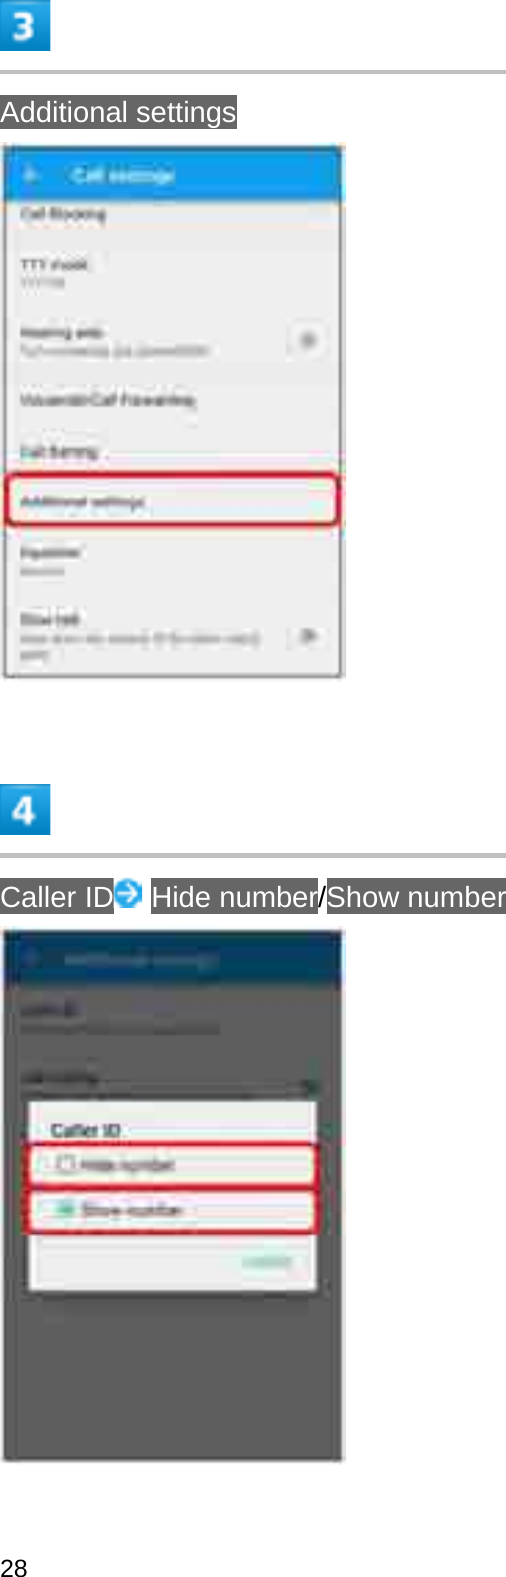 Additional settingsCaller ID Hide number/Show number28